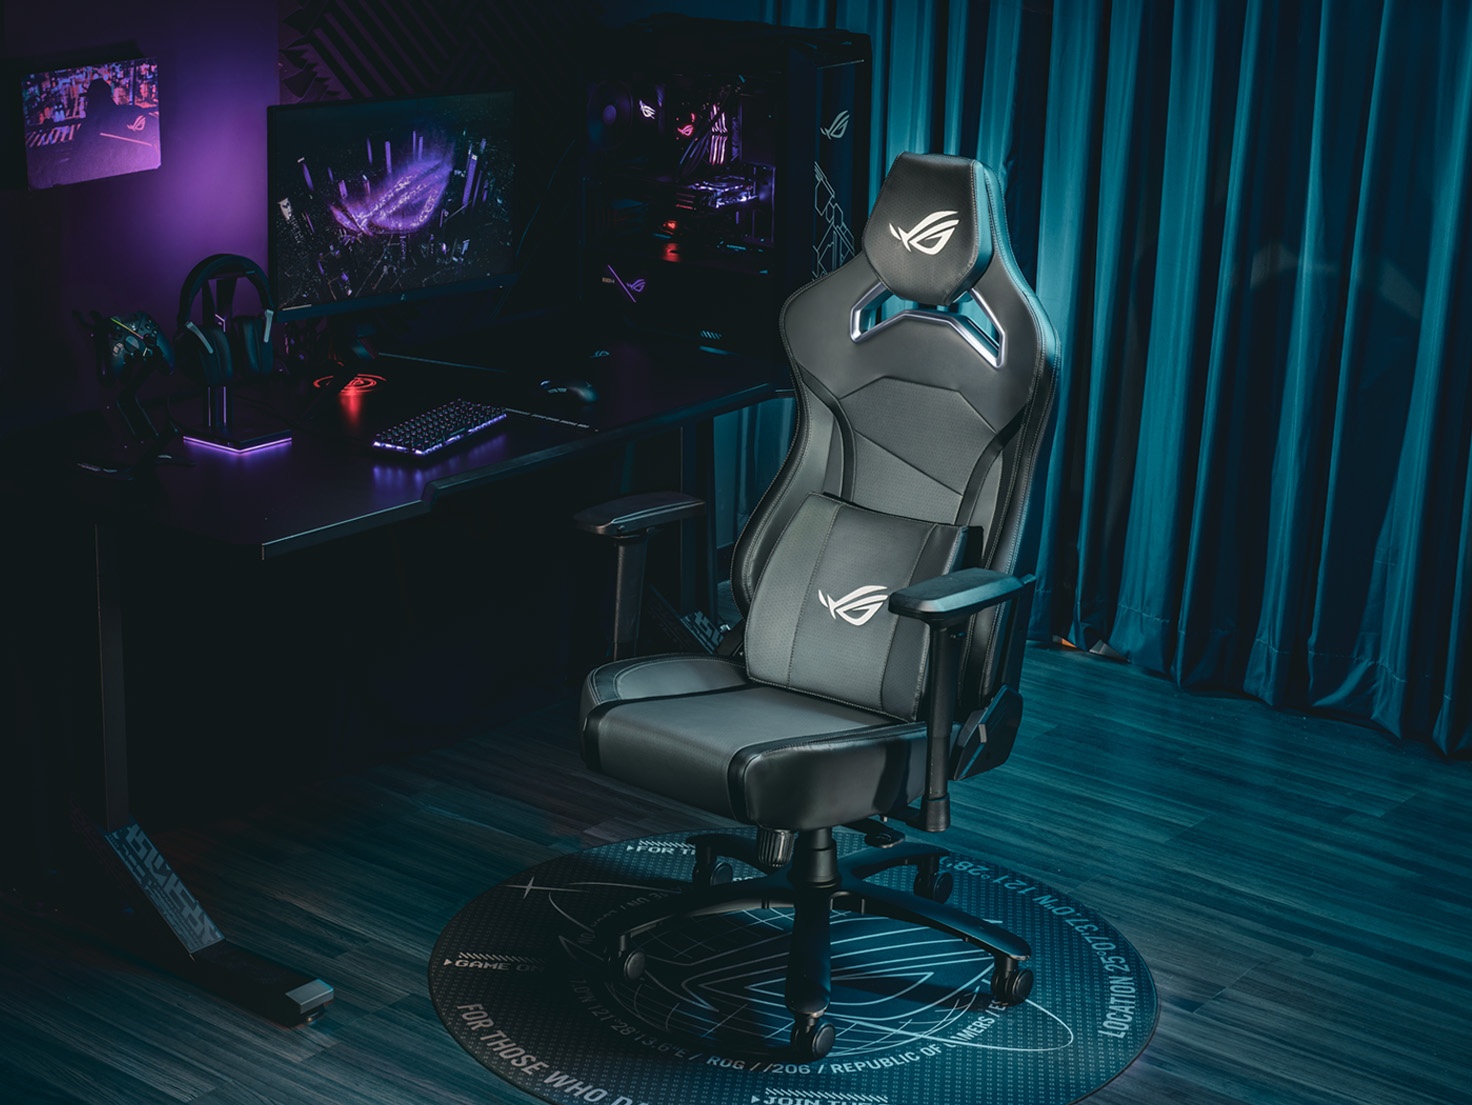 ROG Chariot X gaming chair front view to the left in a gaming room setting